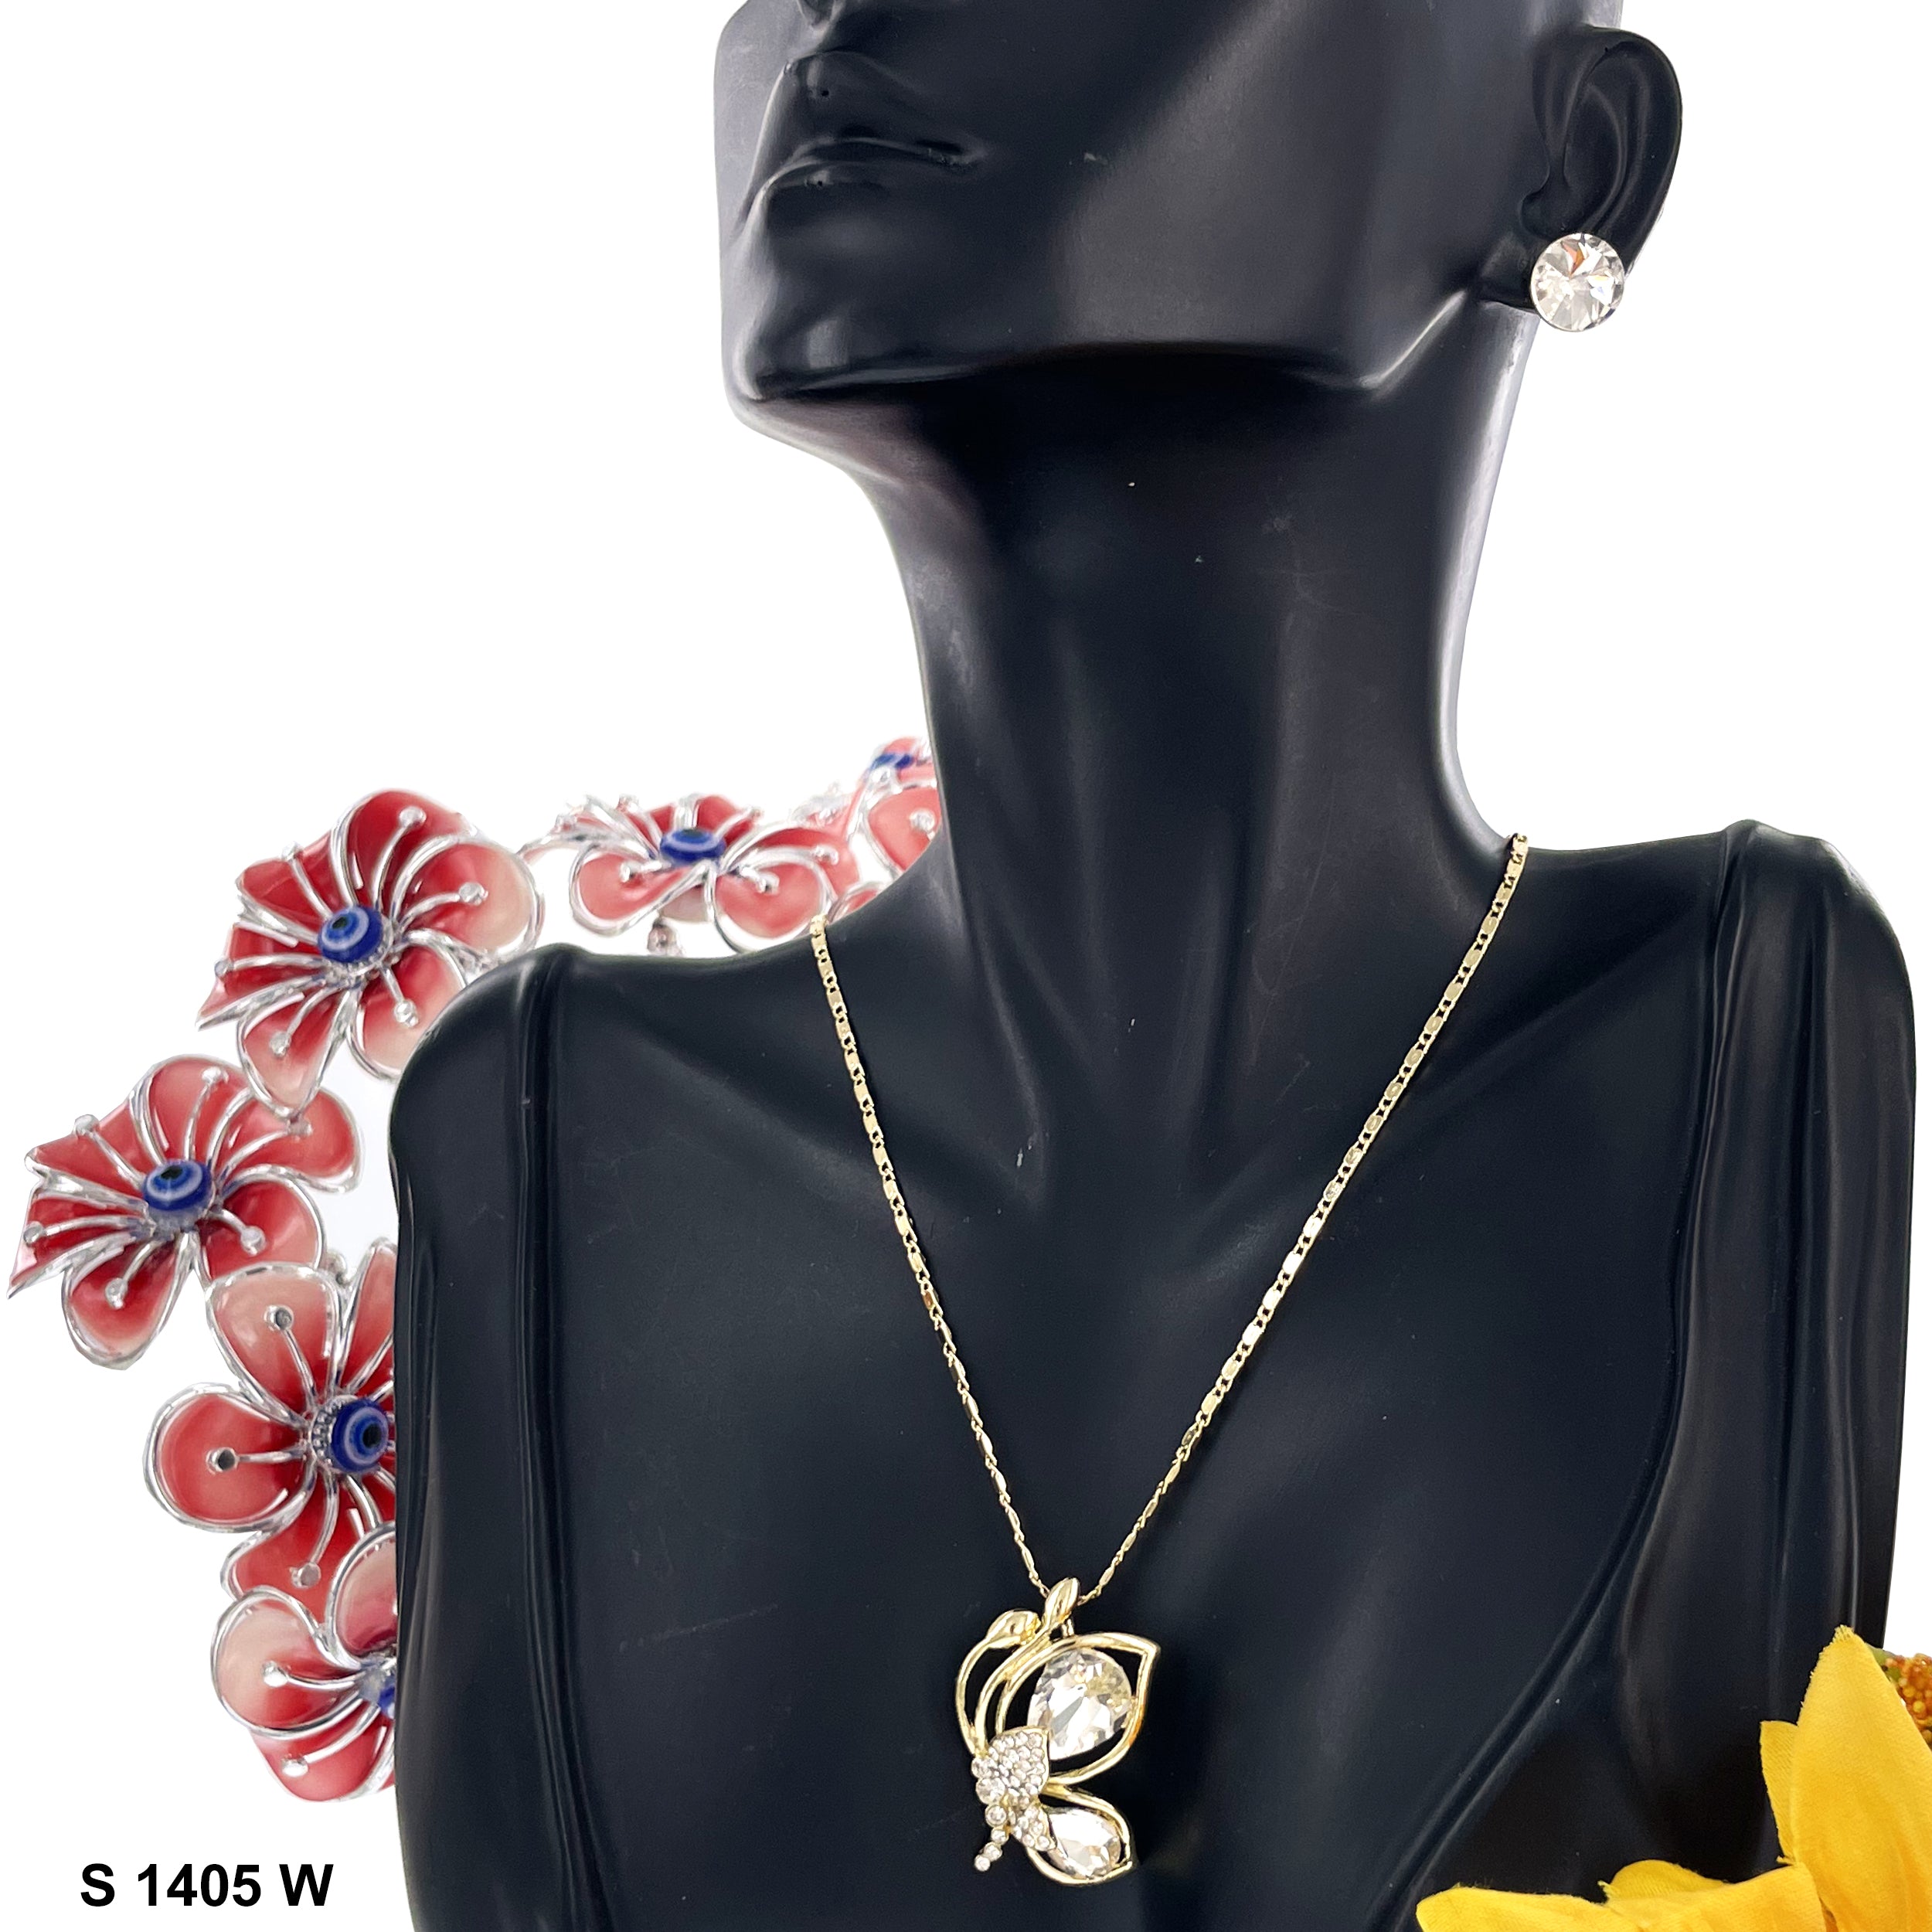 Butterfly Stoned Pendant Necklace Set S 1405 W